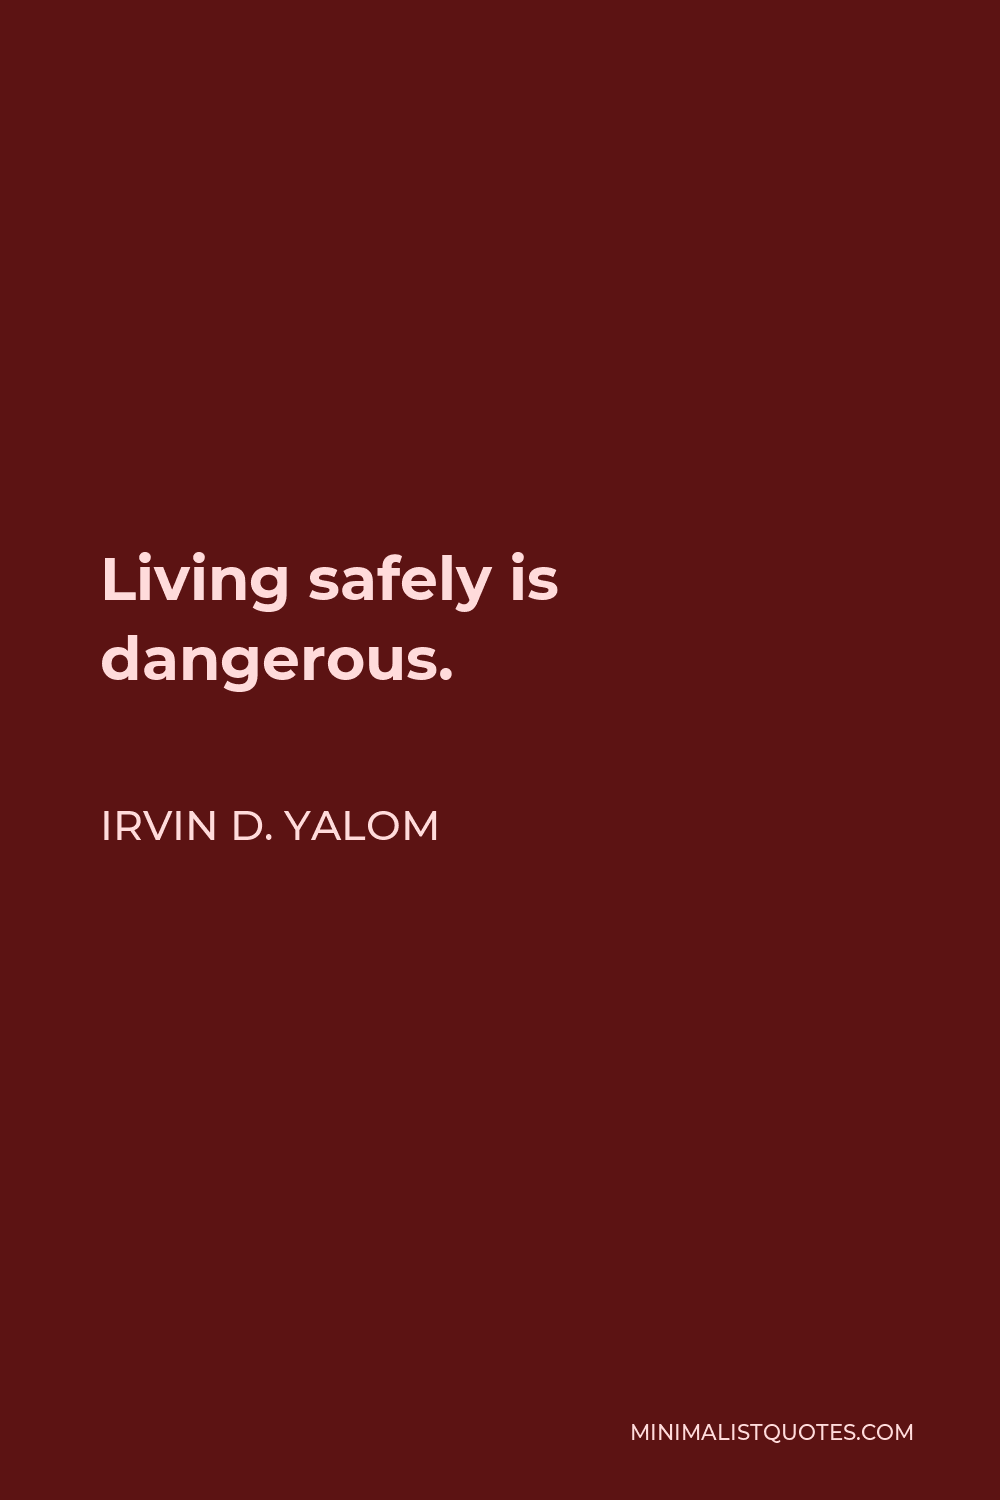 Irvin D. Yalom Quote - Living safely is dangerous.